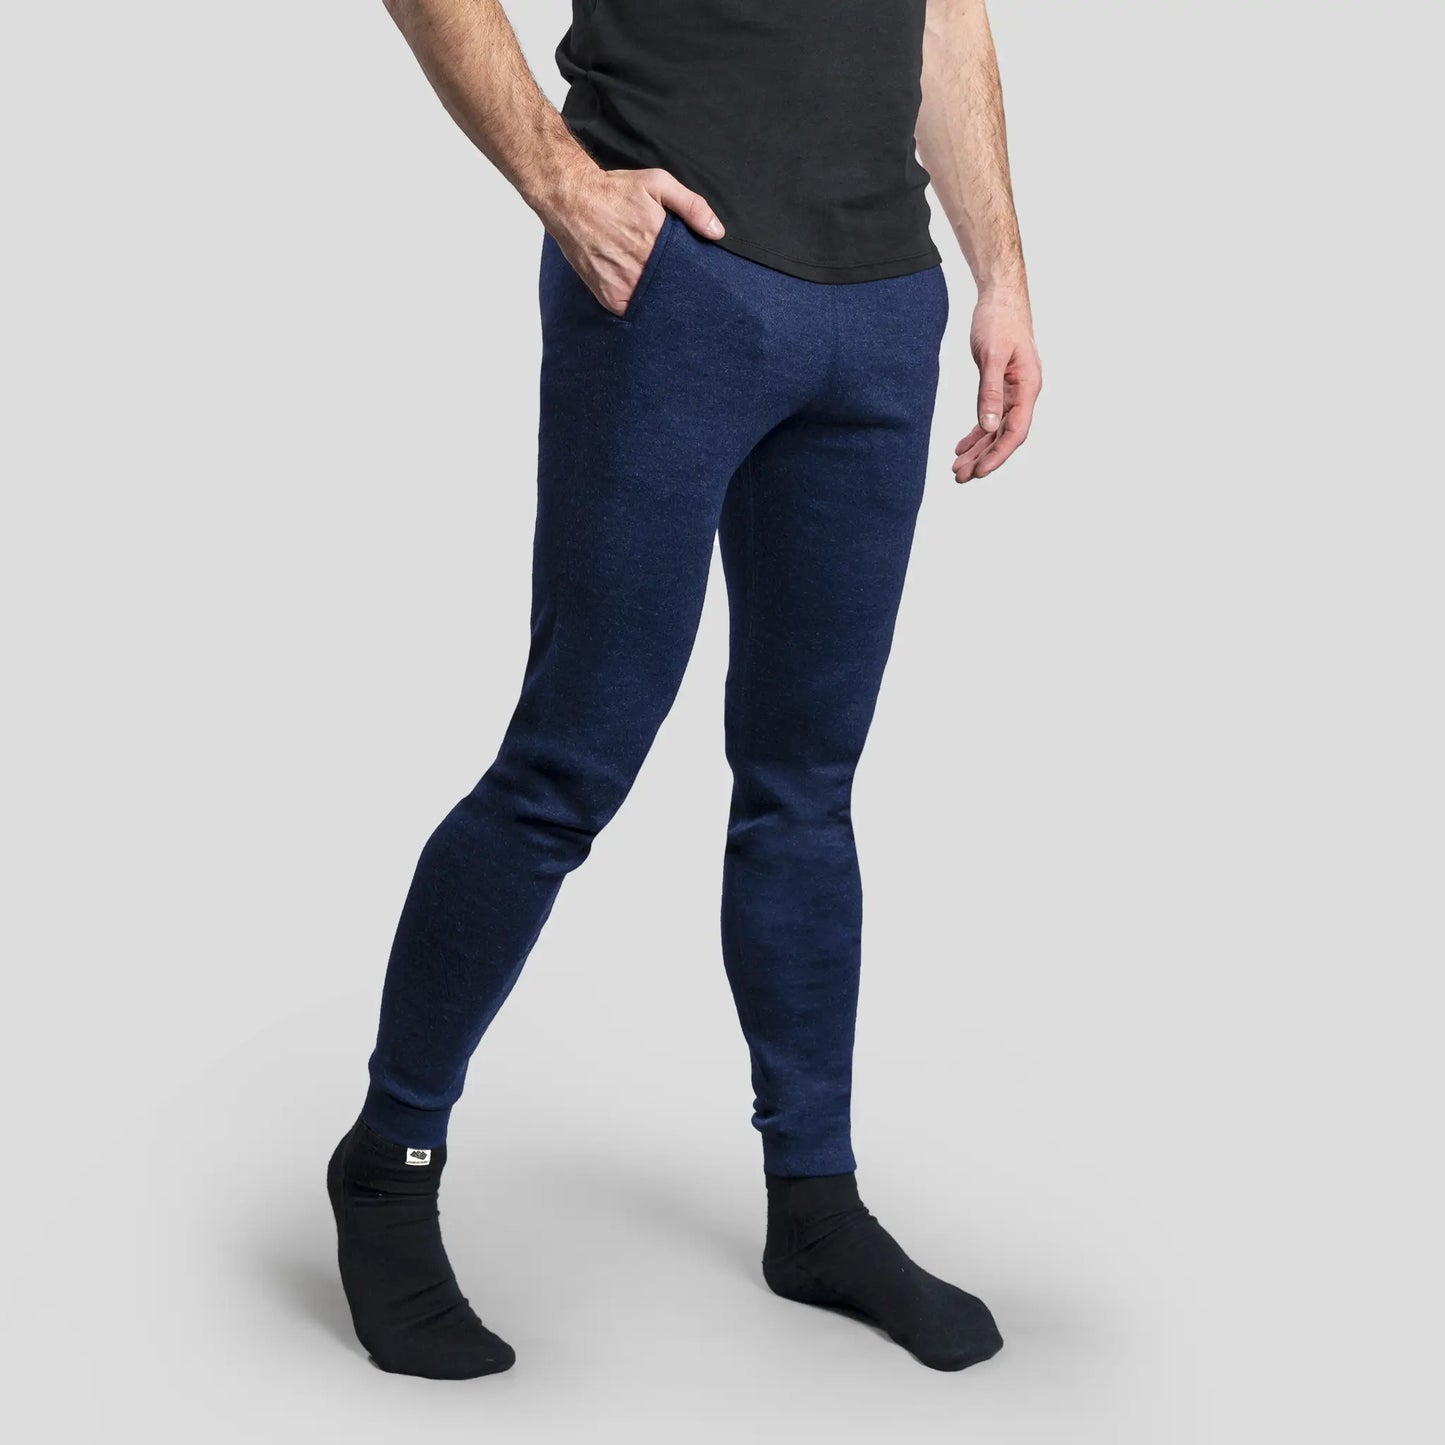 mens fast drying sweatpants midweight color navy blue